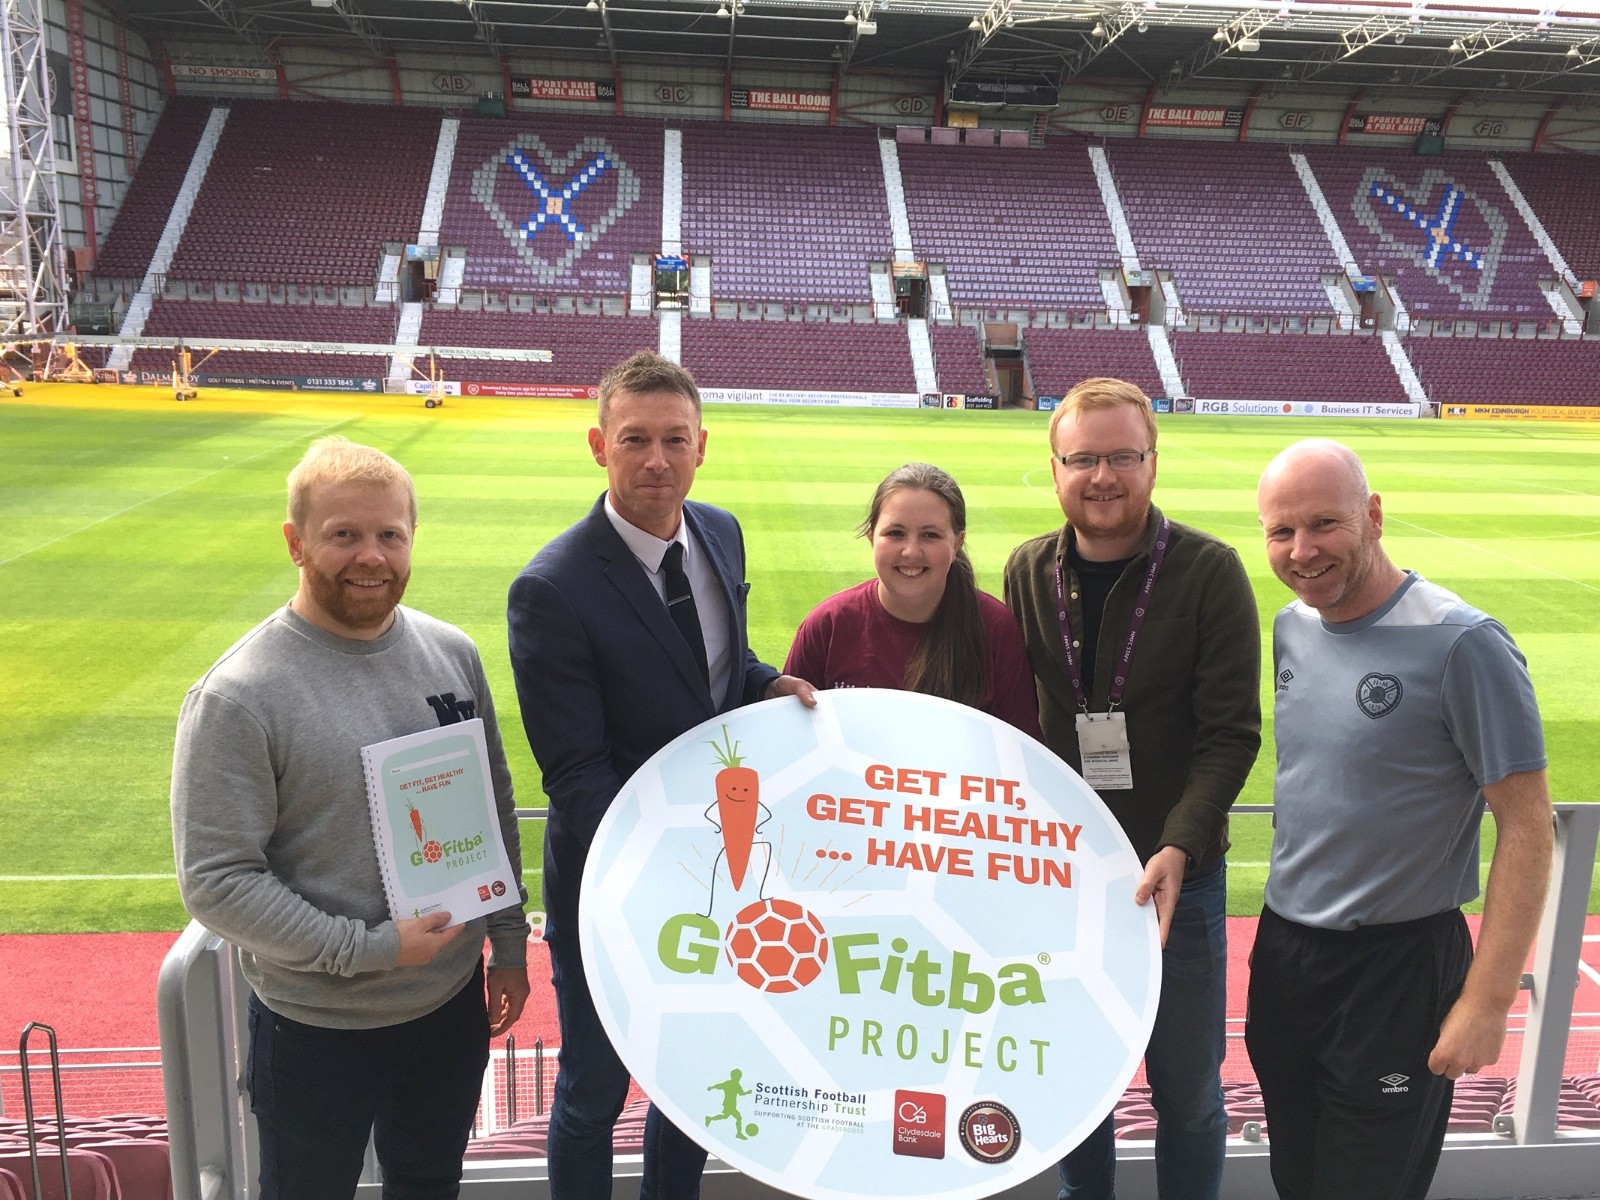  » GoFitba: Big Hearts leading health & wellbeing project in Gorgie/Dalry